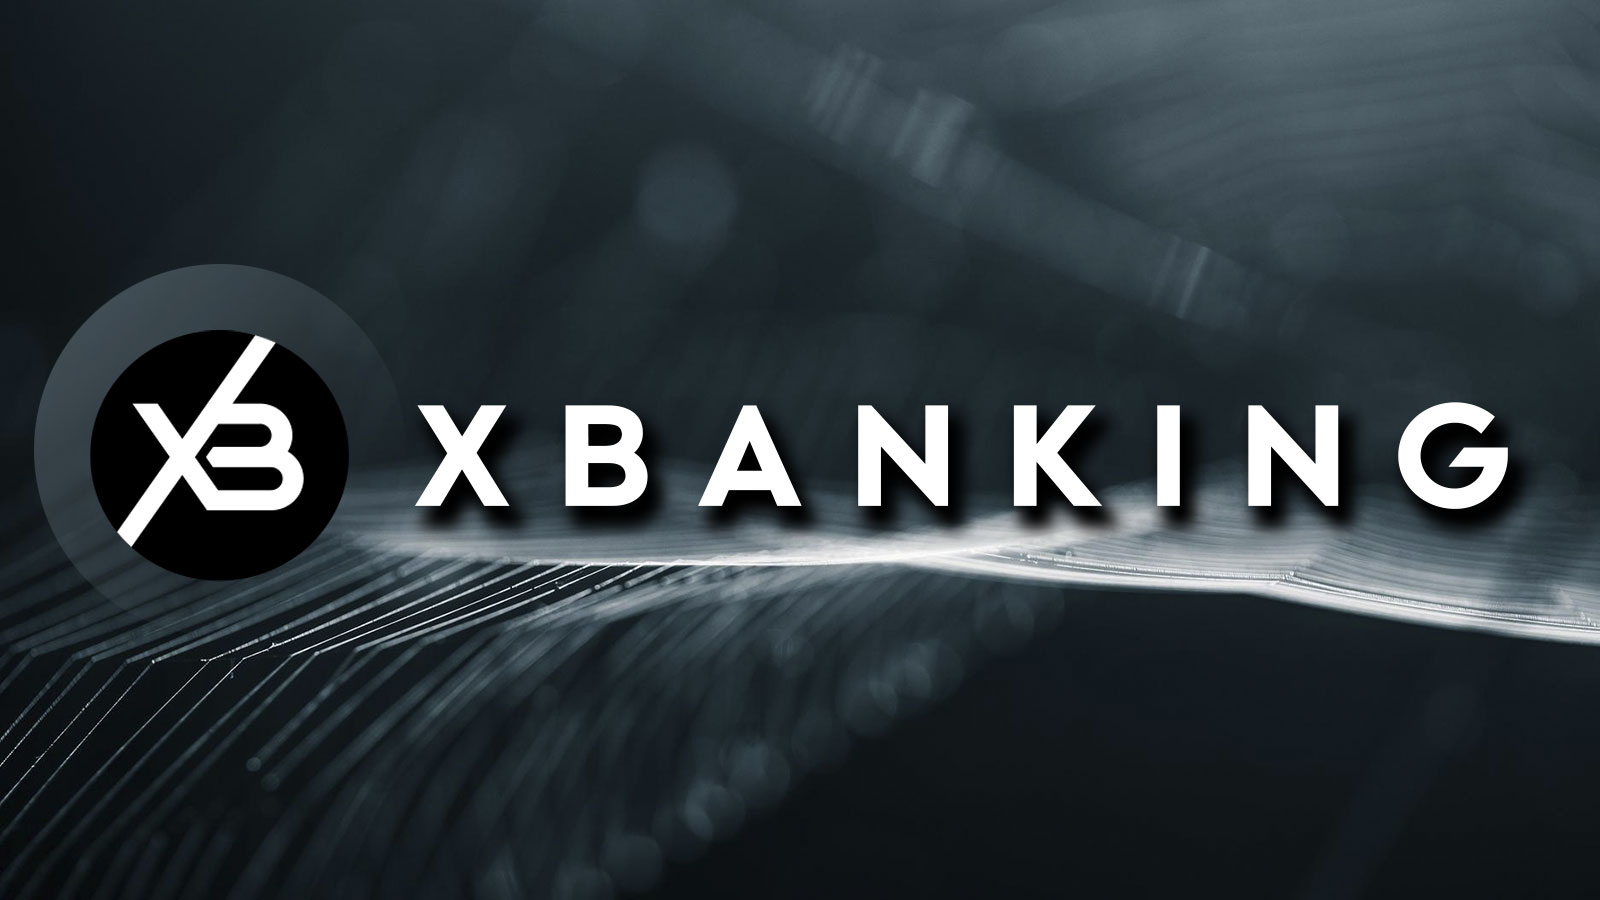 XBANKING Launches Revolutionary Restaking Protocol to Boost Passive Income for Cryptocurrency Holders